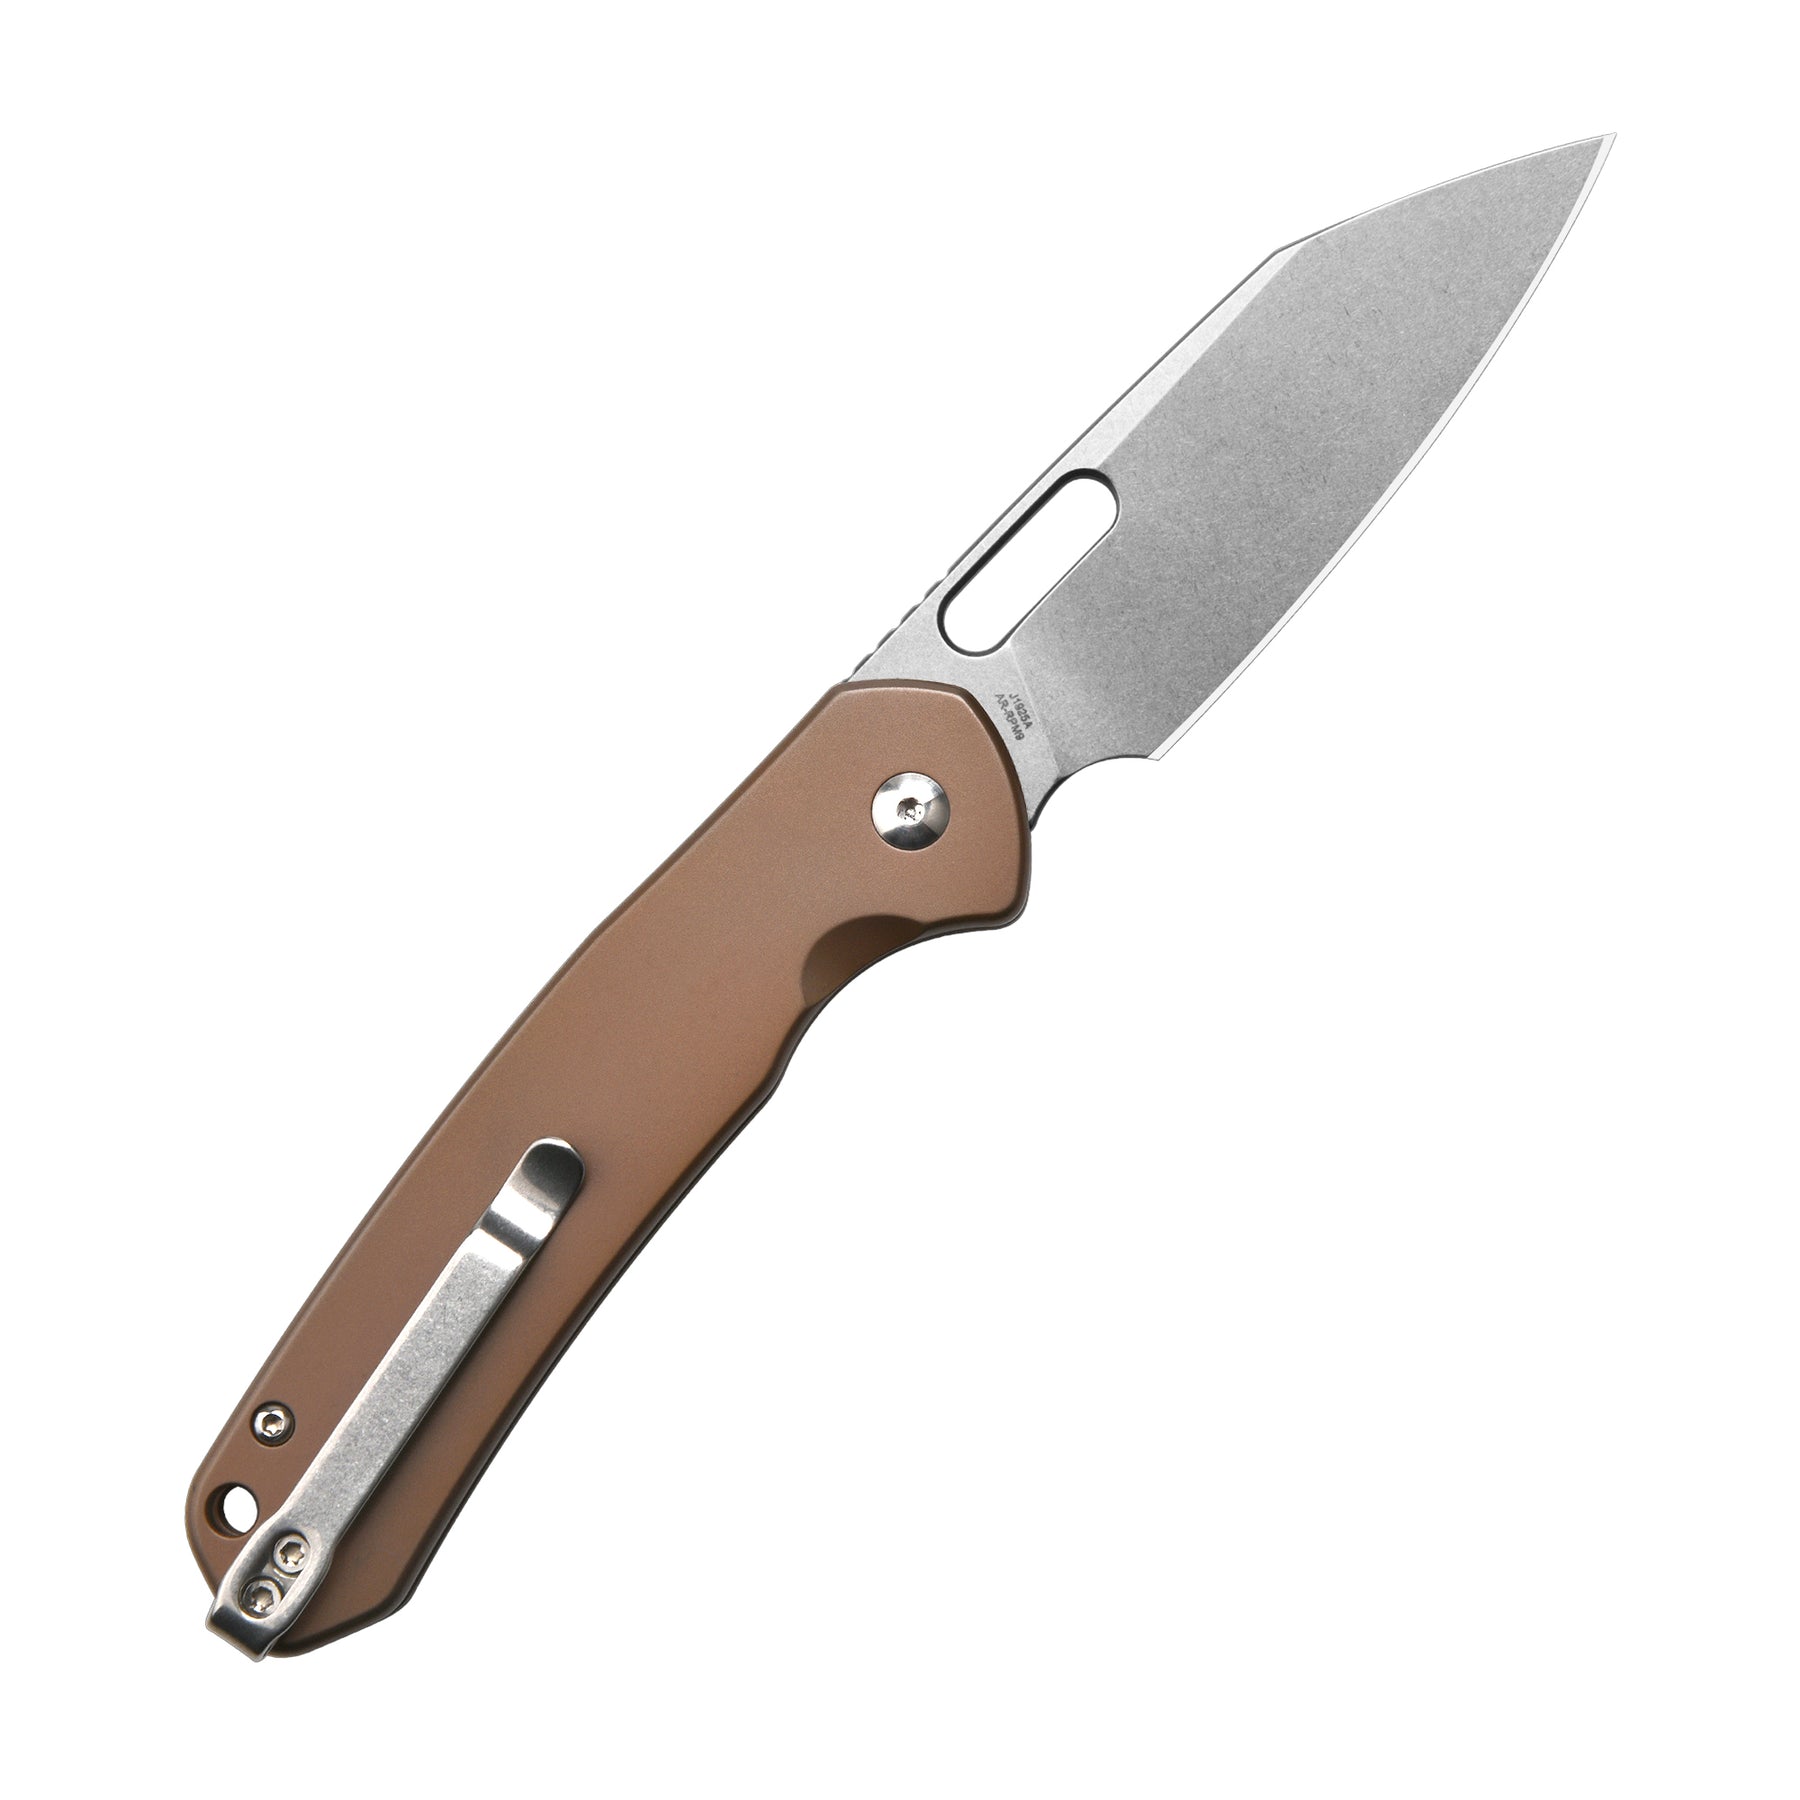 CJRB PYRITE WHARNCLIFFE J1925A AR-RPM9 POWDER STEEL BLADE STEEL HANDLE FOLDING KNIVES COPPER STEEL COLOR